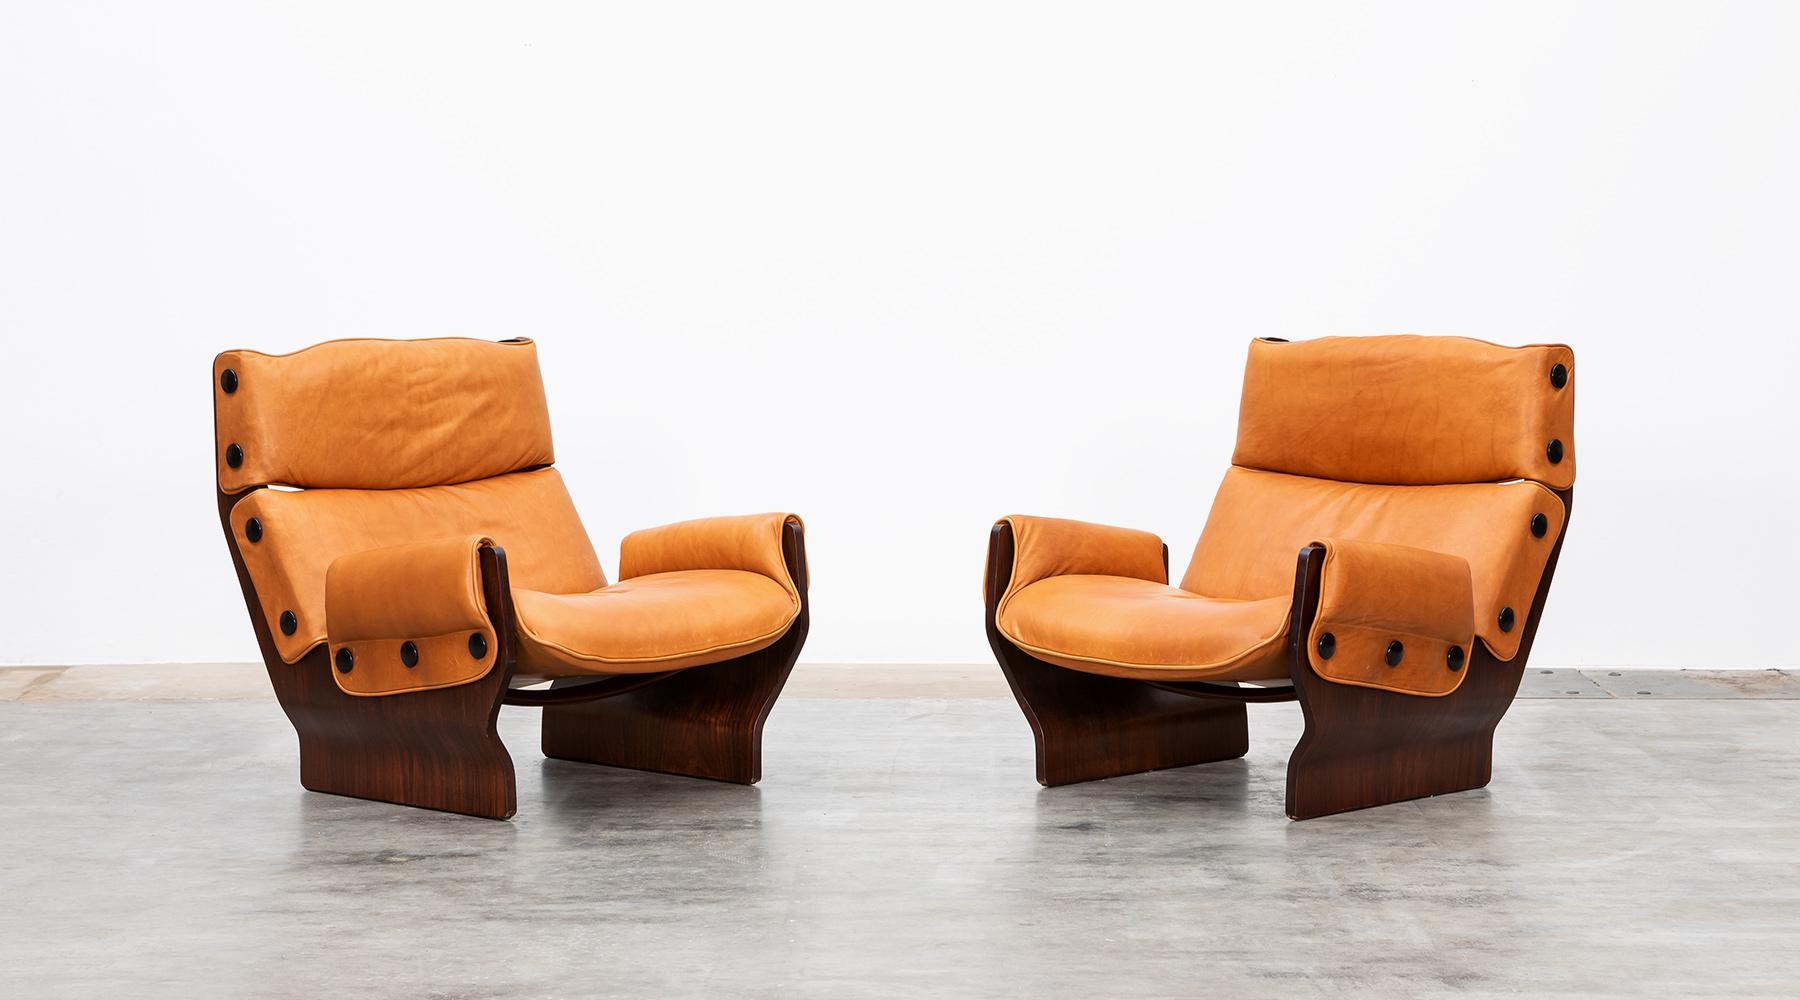 Two majestic, rustic lounge chairs designed by famous Osvaldo Borsani. The seats are newly upholstered in high-quality leather and comes on a wooden base. On the sides are decorative button borders, which are also made of wood. A wonderful